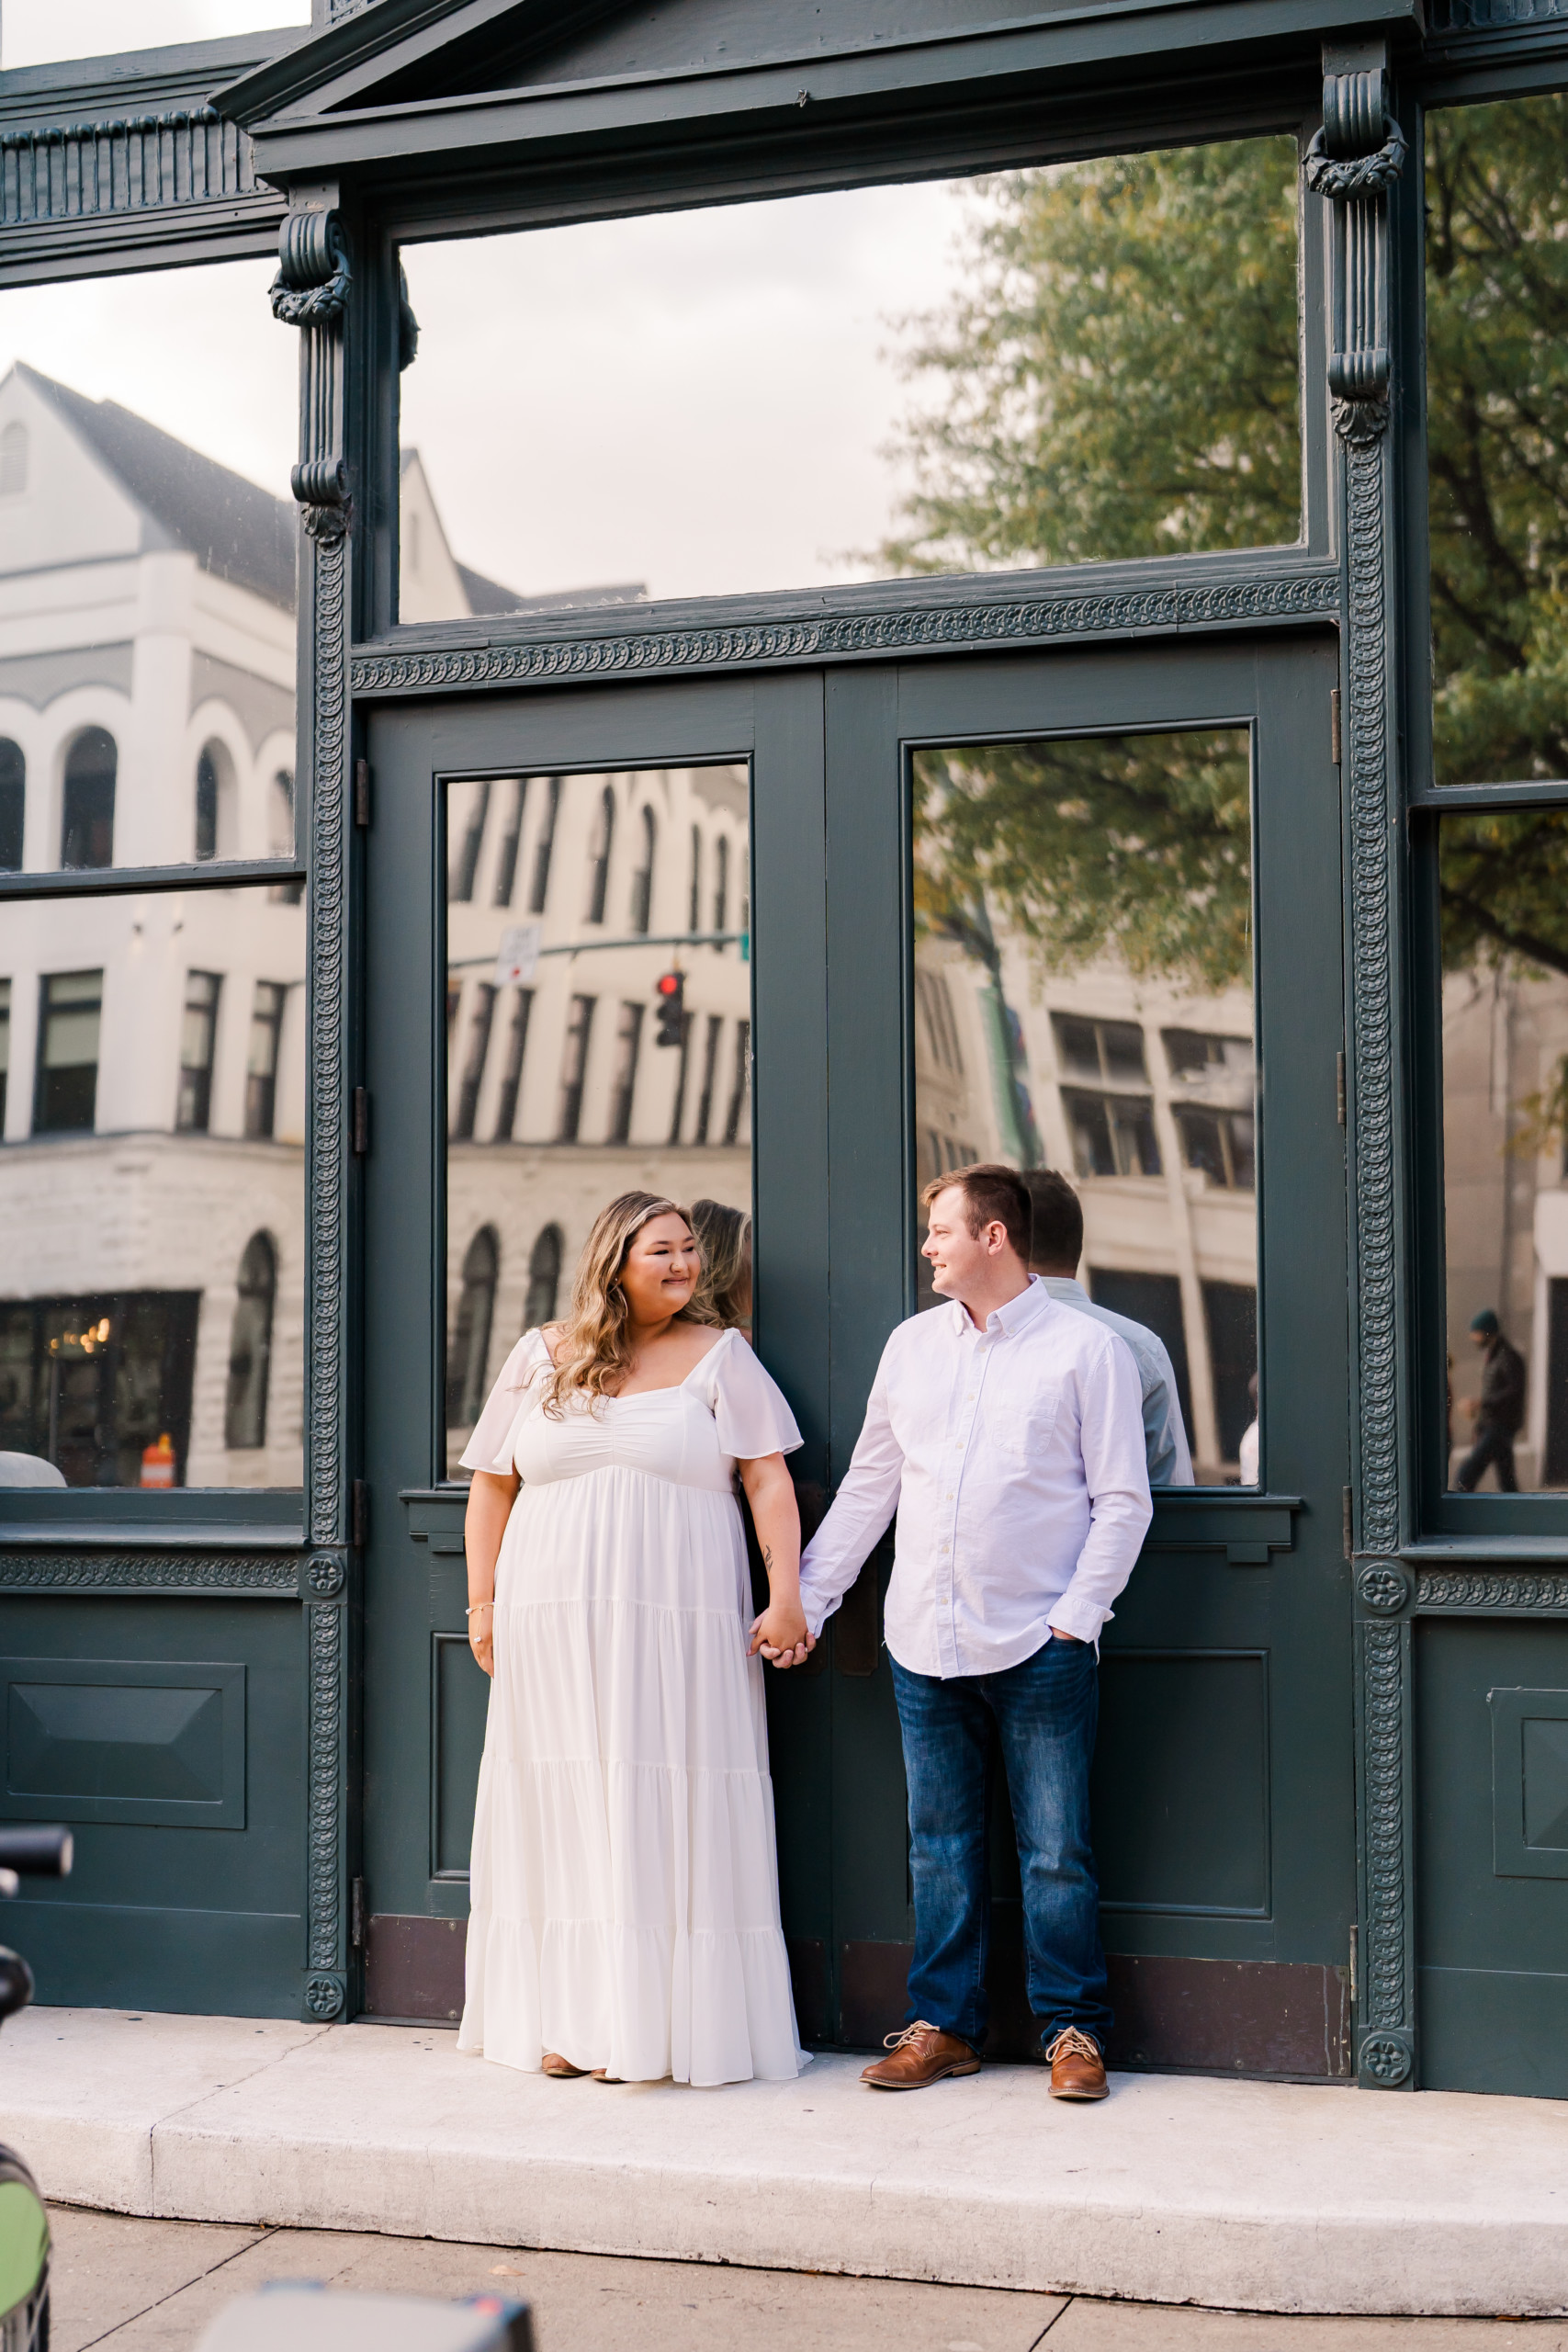 Downtown Chattanooga Engagement Smiling Couple